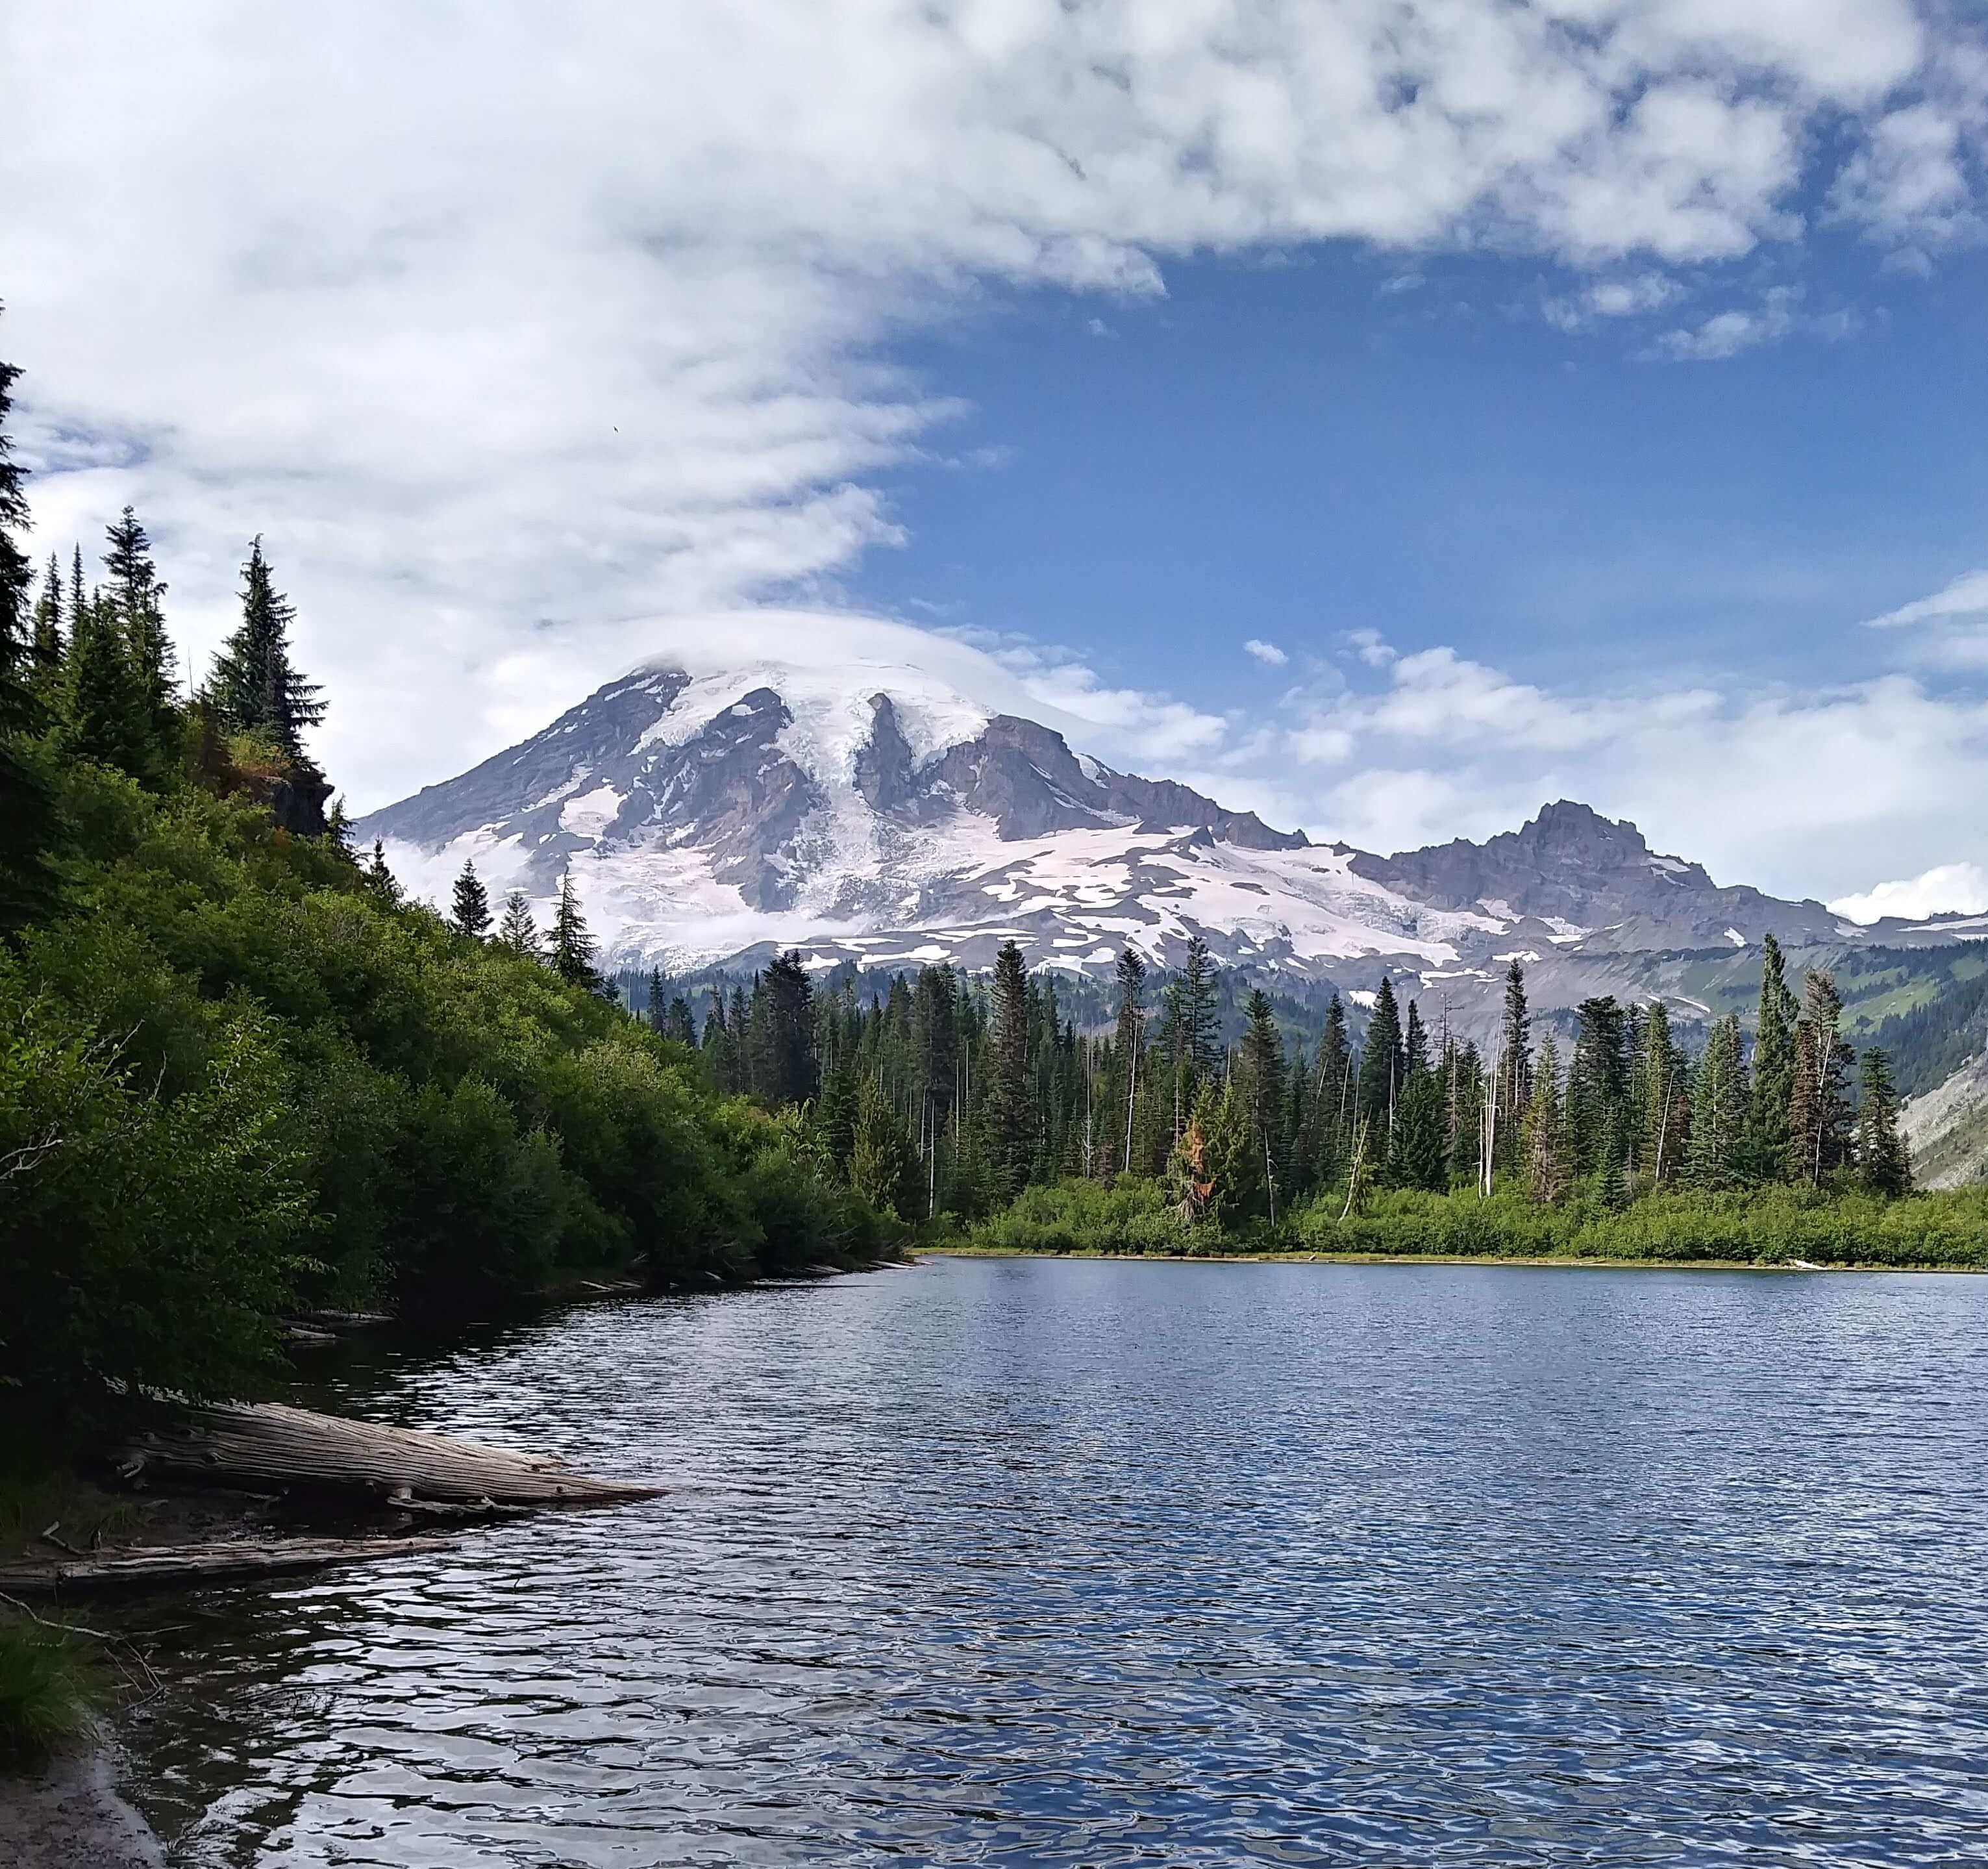 View of Mount Rainier from Bench Lake in Mount Rainier National Park